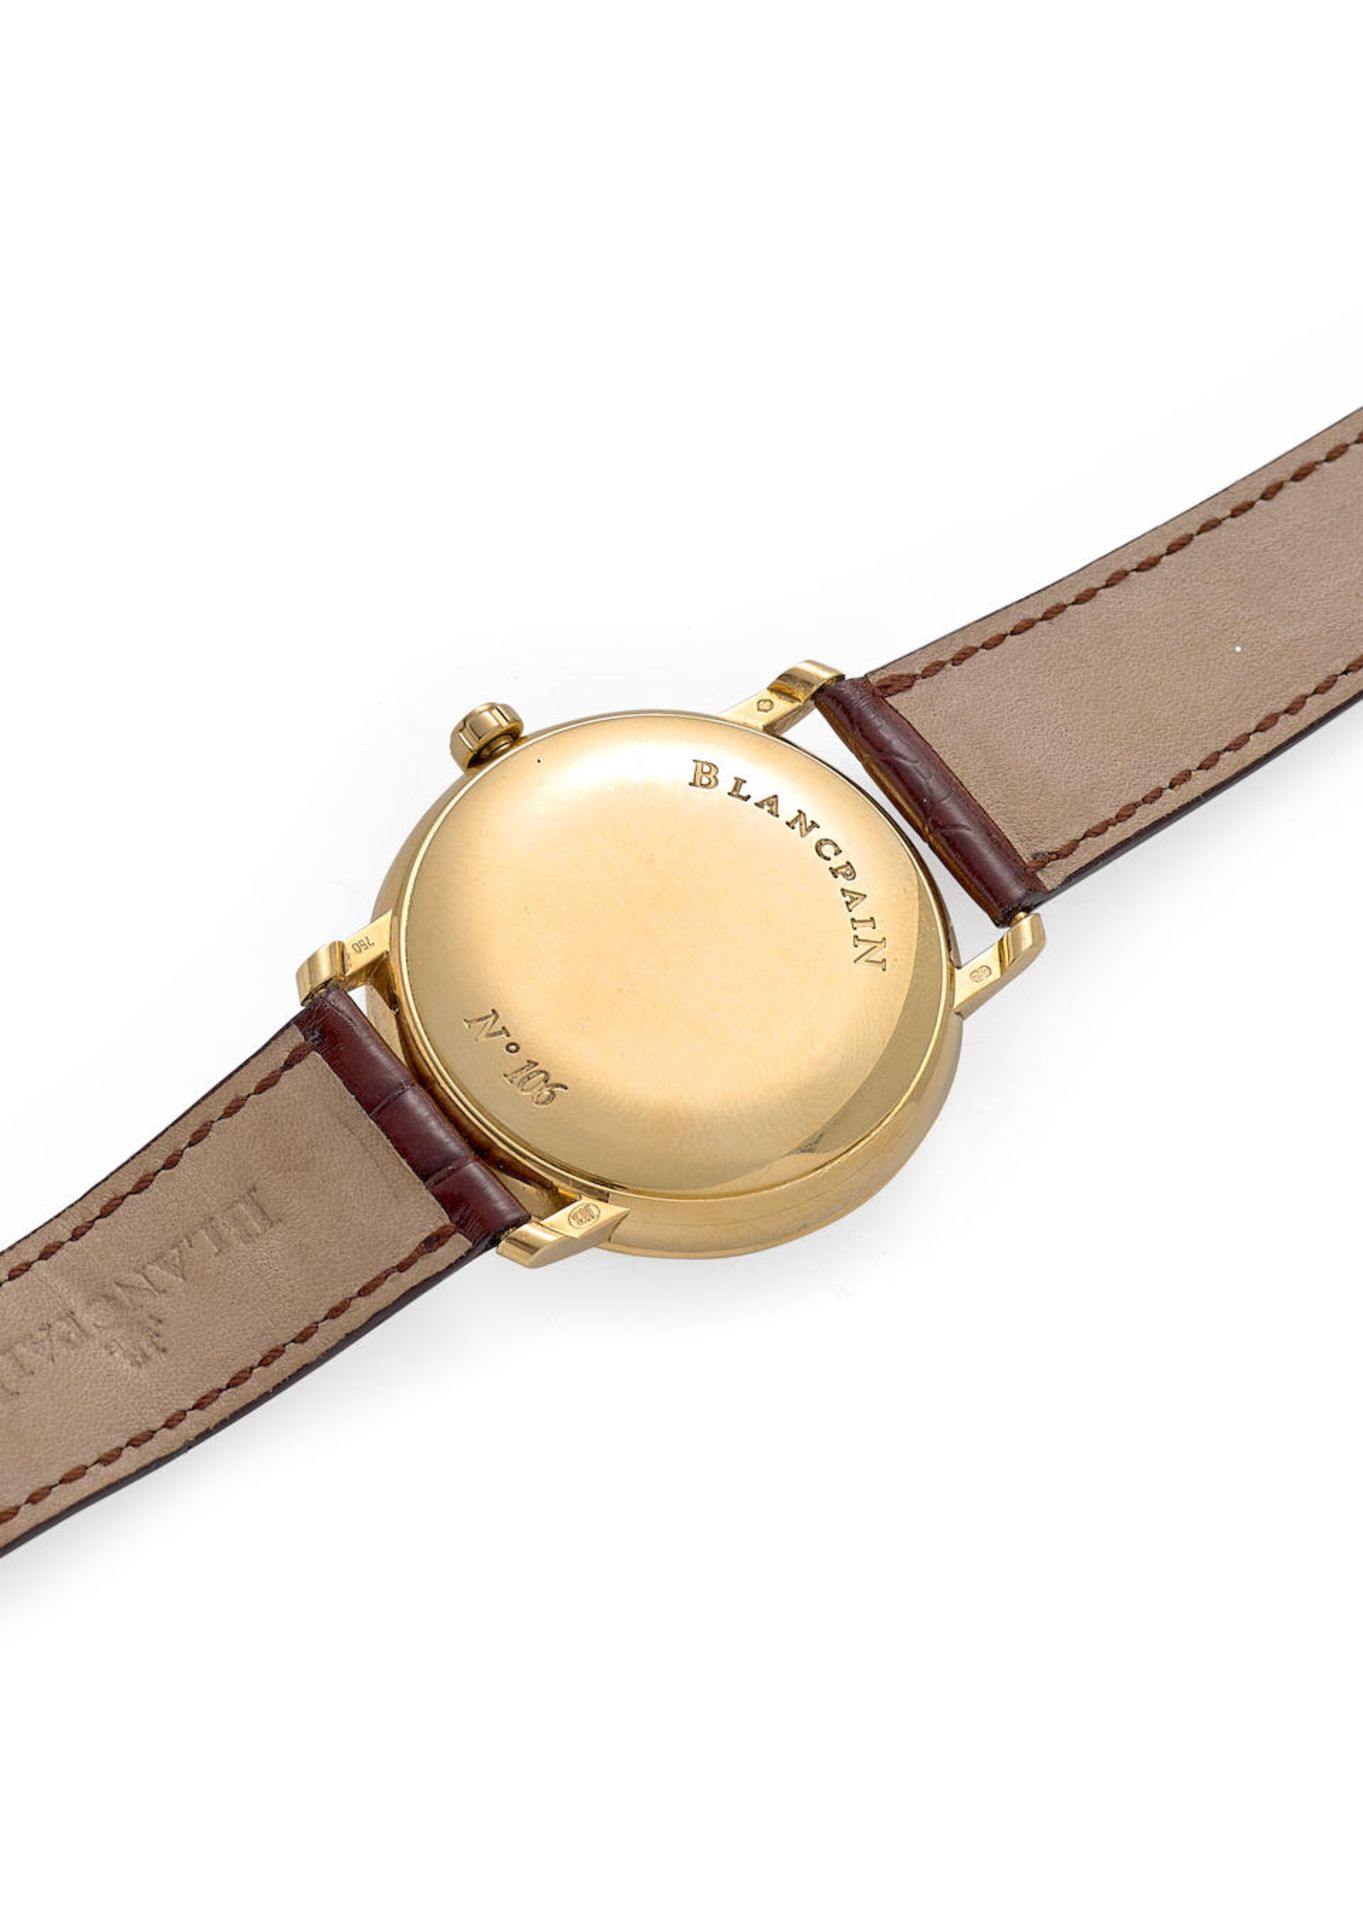 BLANCPAIN. AN 18K GOLD AUTOMATIC WRISTWATCH Villeret, Ref: 6222 1442 55, c. 2000s - Image 3 of 6